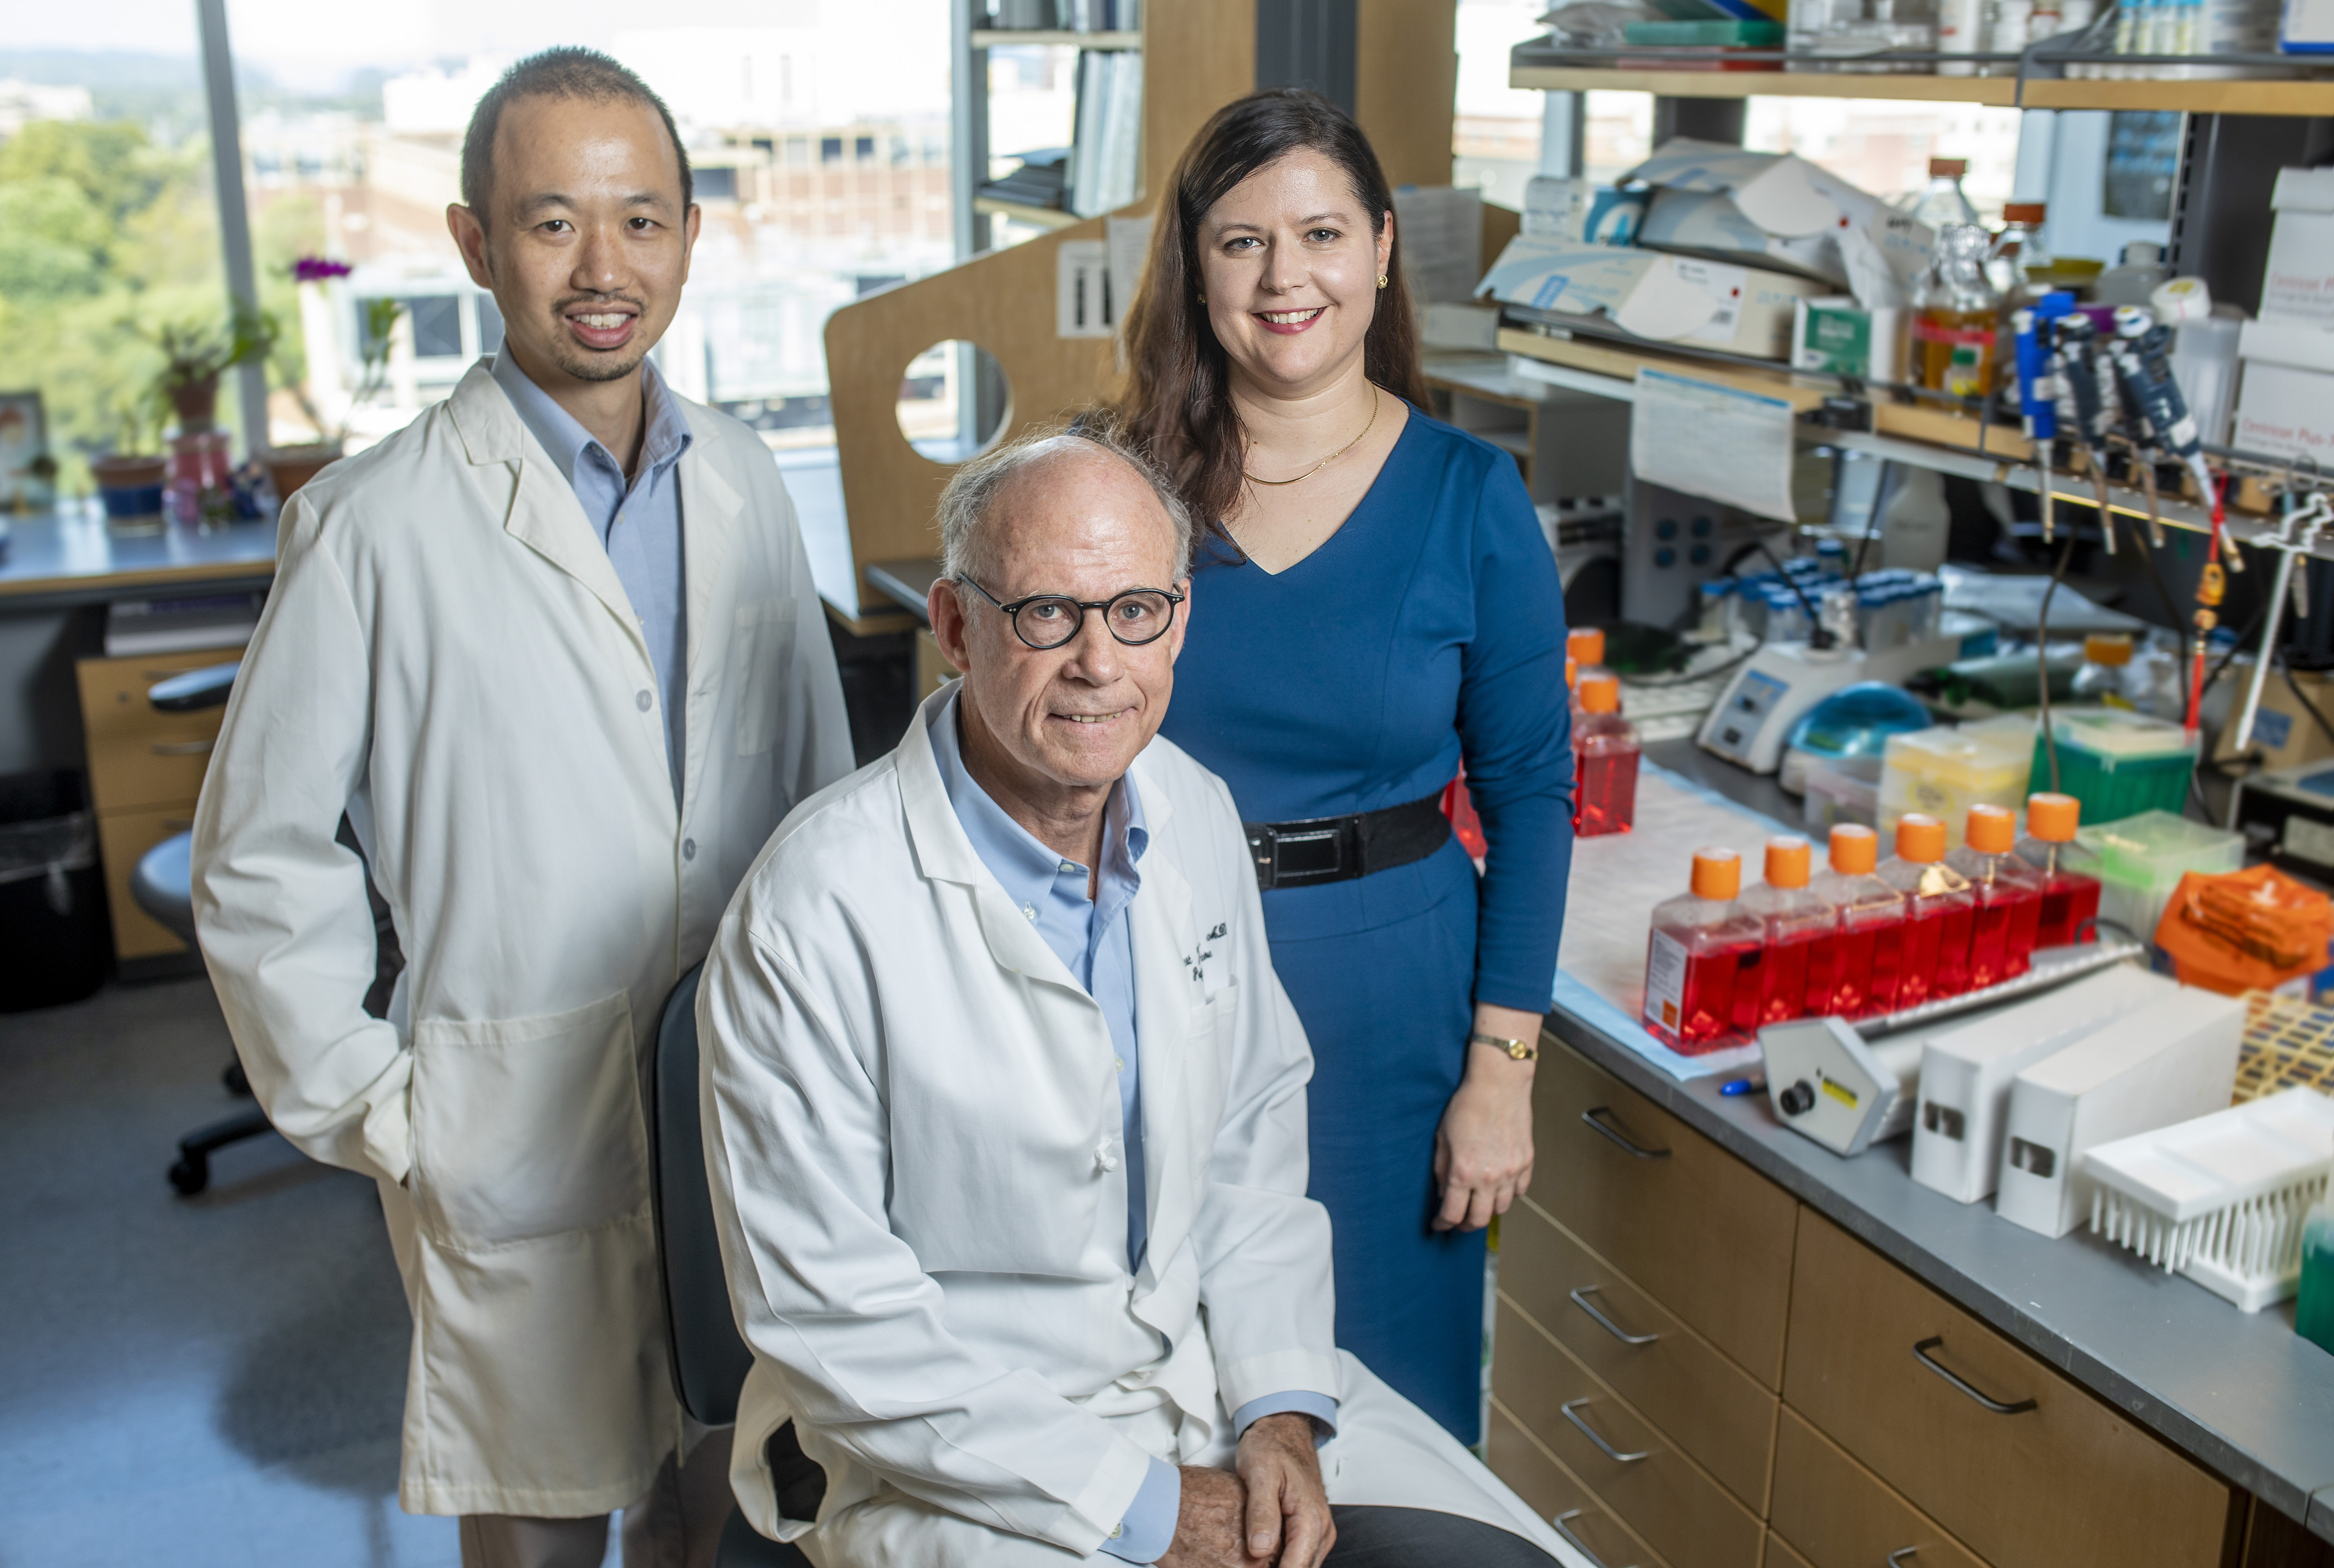 Group photo of (left-to-right) Ken Lau, Robert Coffey, and Martha Shrubsole, in a lab setting.